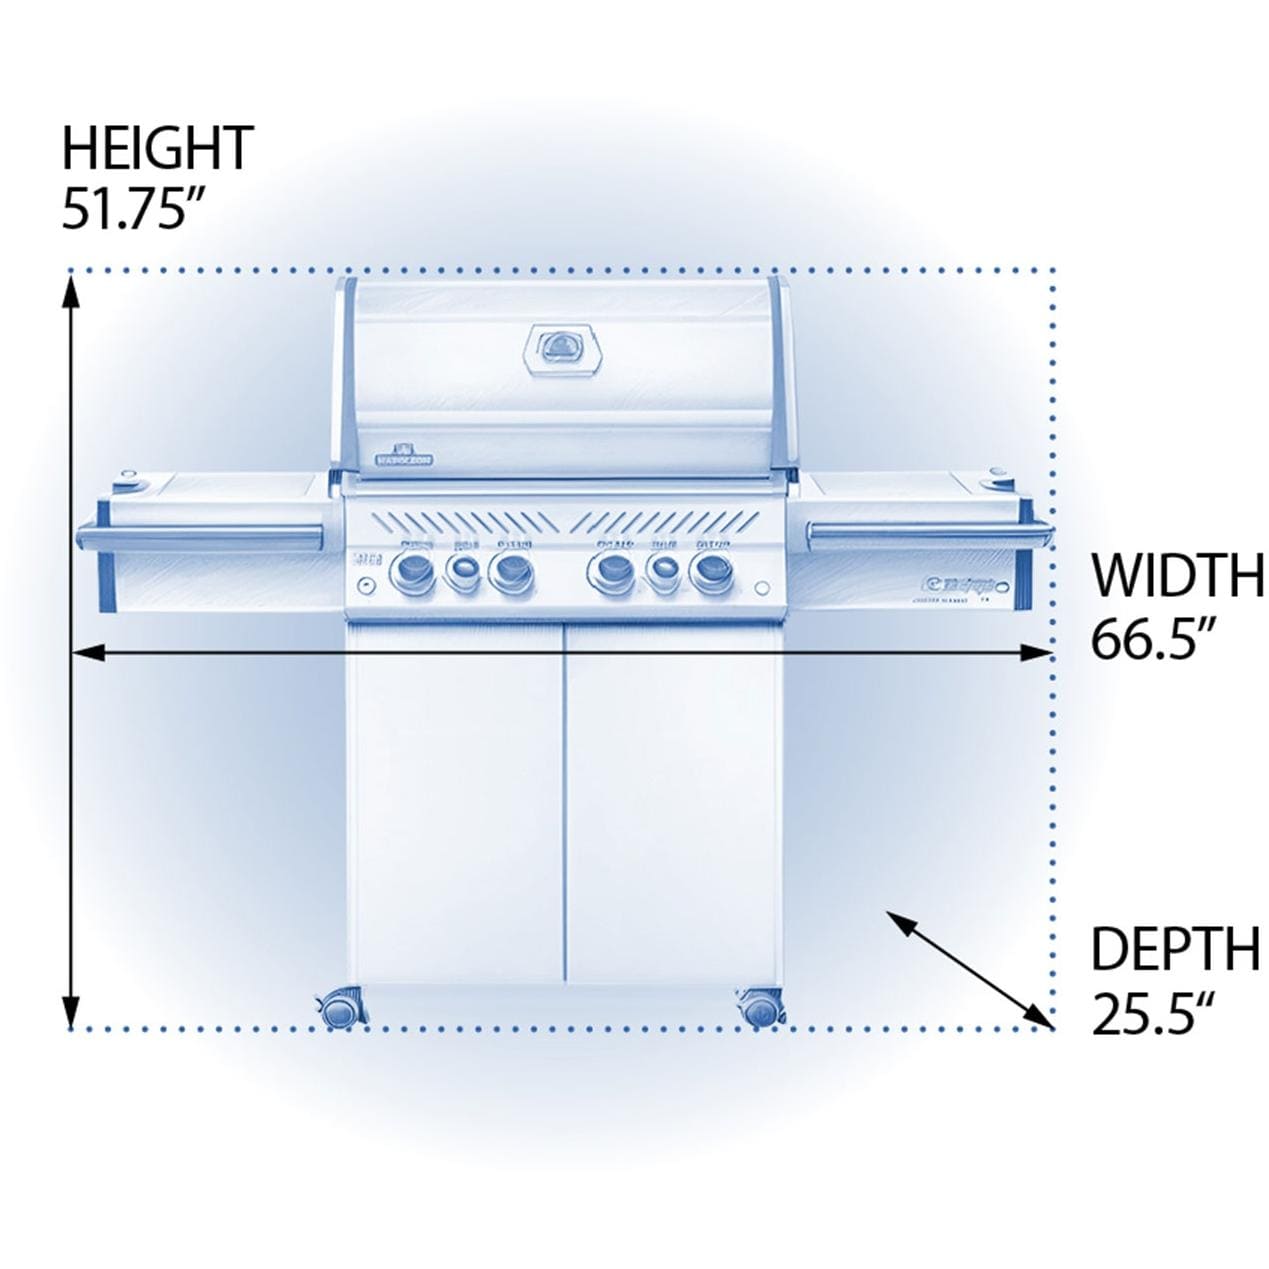 Napoleon PRO500RSIBNSS-3 Prestige Pro 500 Natural Gas Grill w/ Infrared Burners - image 3 of 6